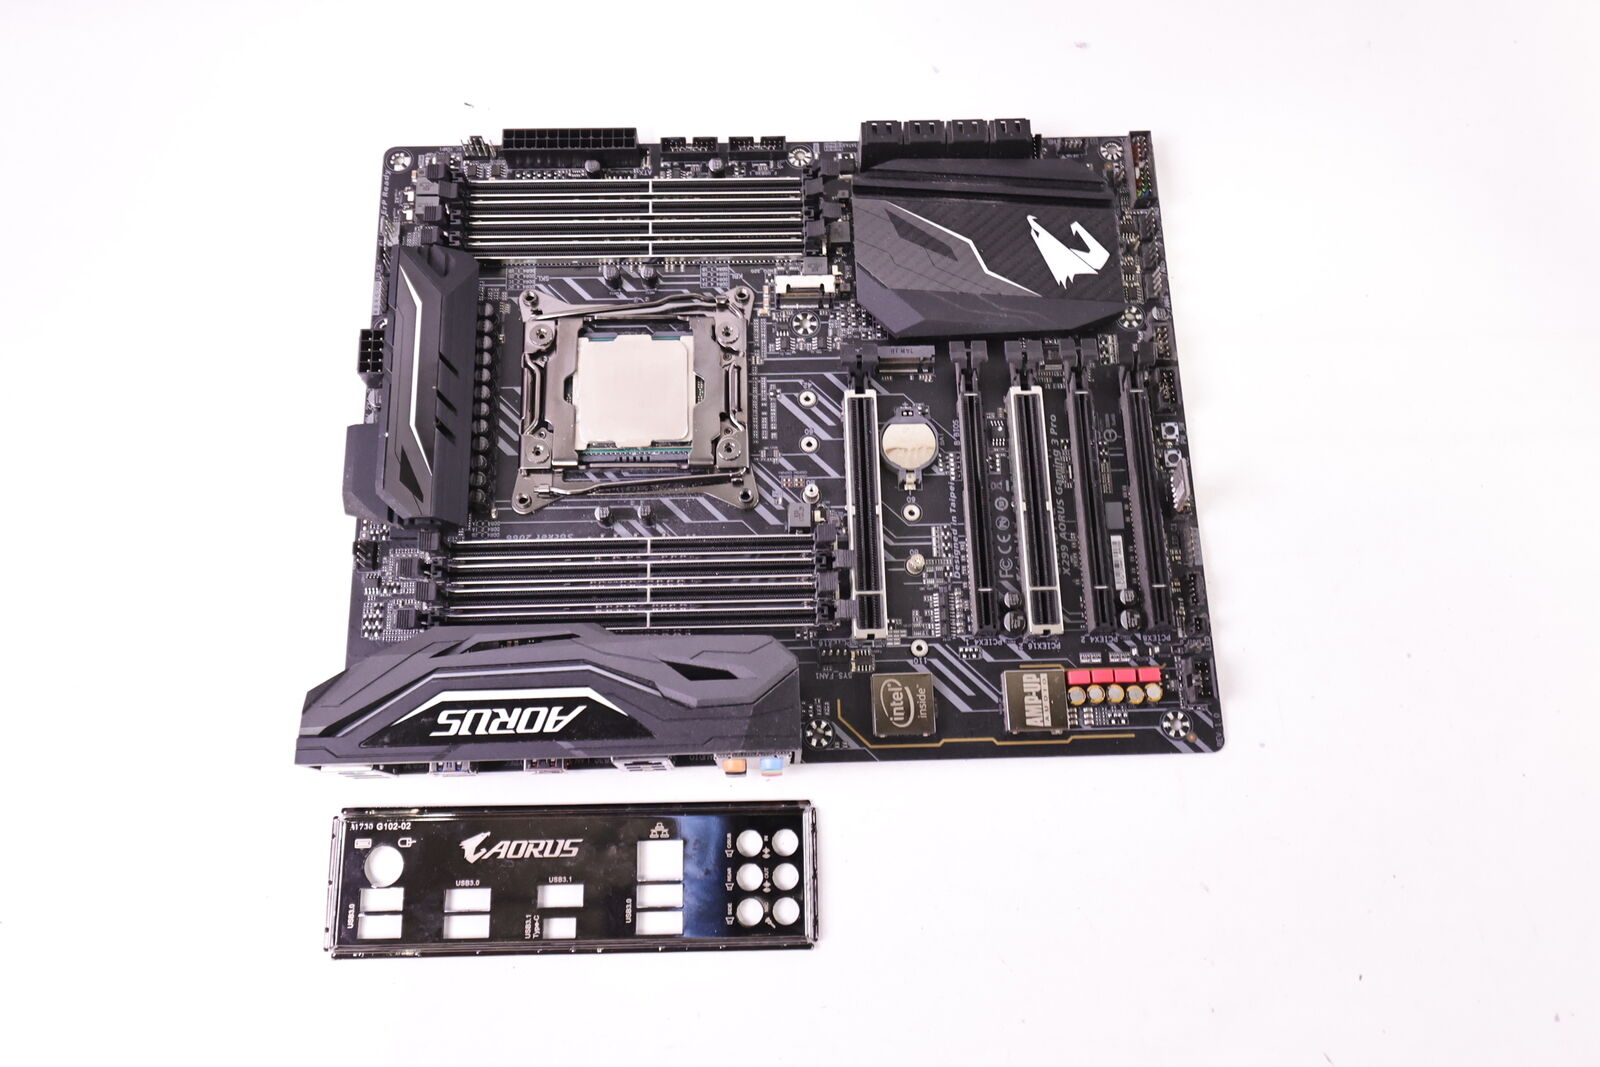 GIGABYTE X299 AORUS GAMING 3 PRO MOTHERBOARD W/ CORE I9-7900X 3.3GHZ PROCESSOR